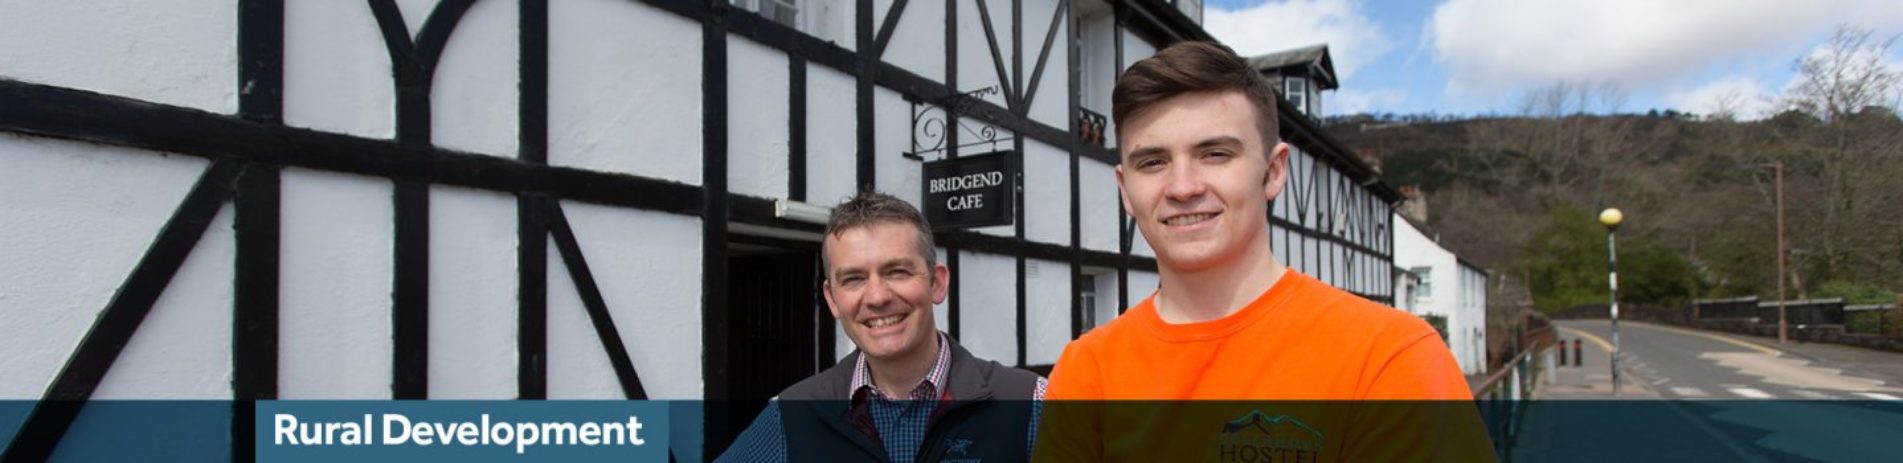 two-men-of-different-ages-smiling-outside-bridgend-cafe-in-callander-text-reads-rural-development